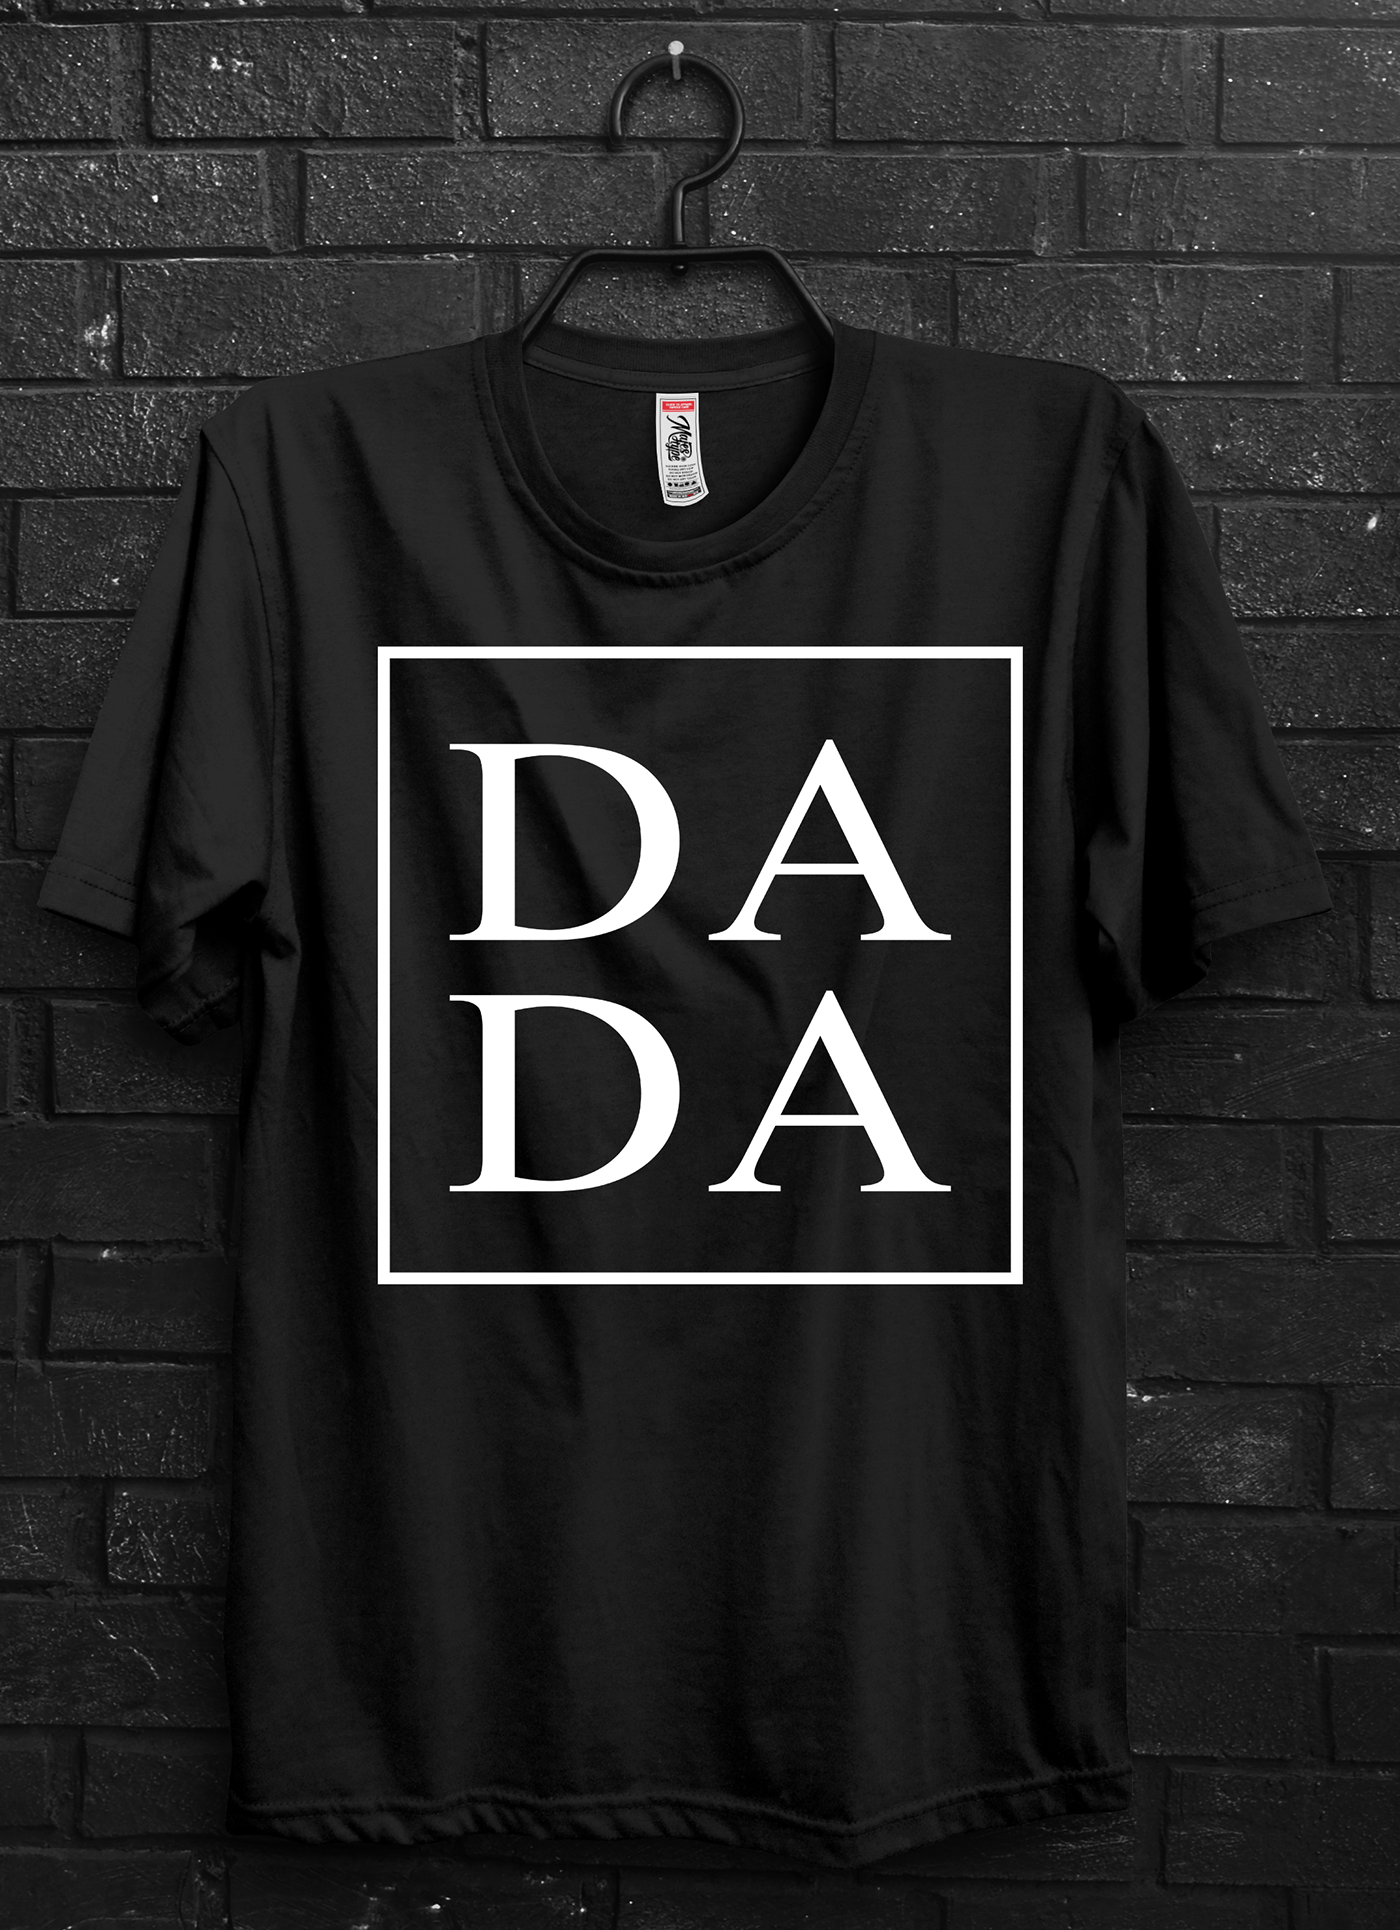 father day tshirt father tshirt design fathers day 2020 Fathers Day Gifts fathers day inspirational fathers day quotes fathers funny quotes T-shirt Design Tshirt typography tshirt design